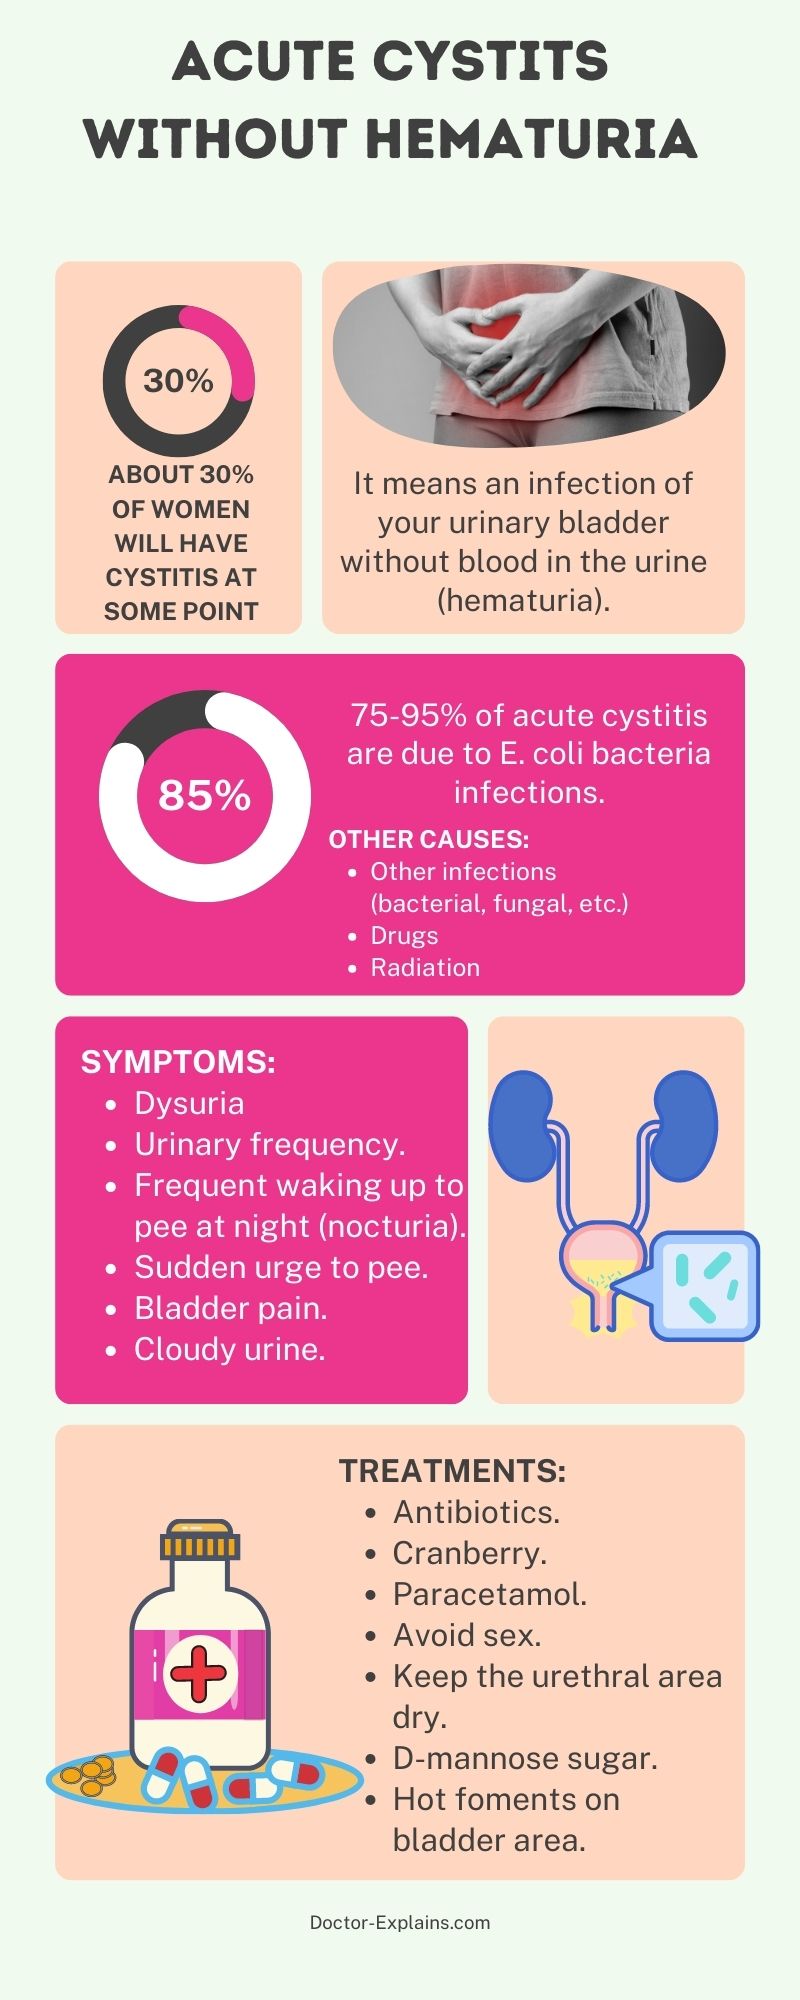 https://doctor-explains.com/wp-content/uploads/2022/11/Acute-cystitis-without-hematuria-infographic.jpg